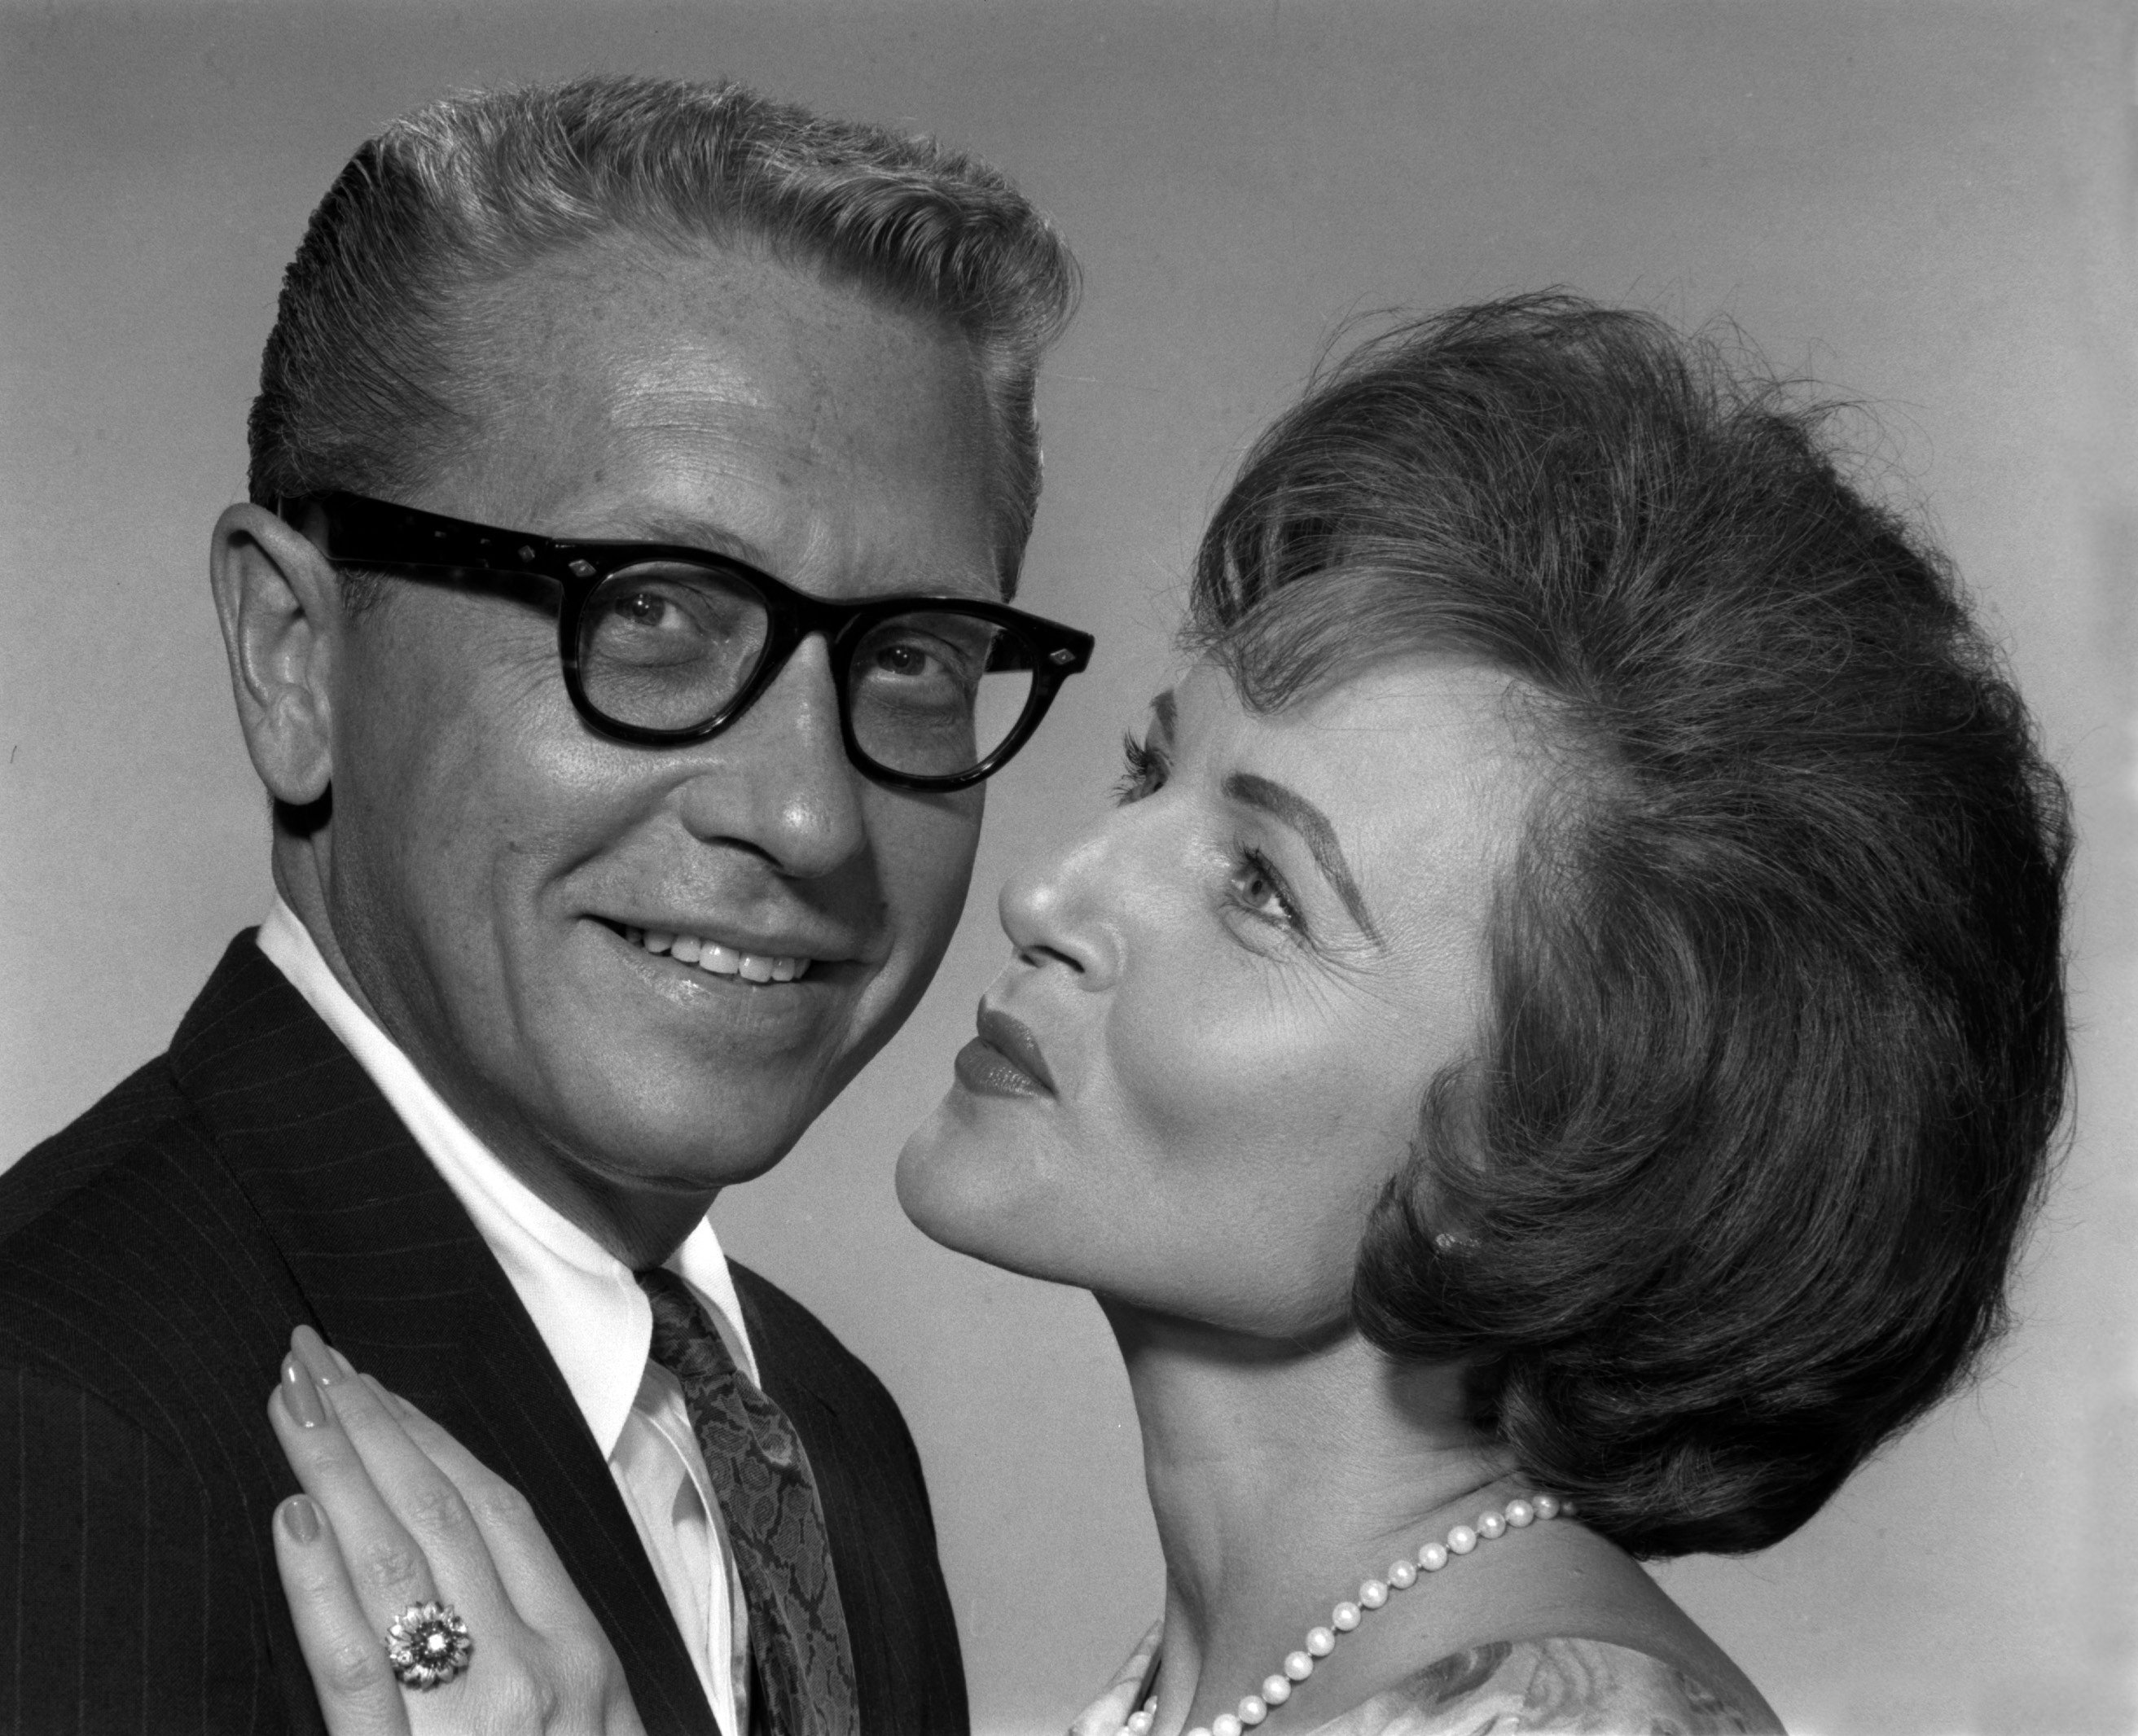 Allen Lunden and Betty White pose for an undated photo together